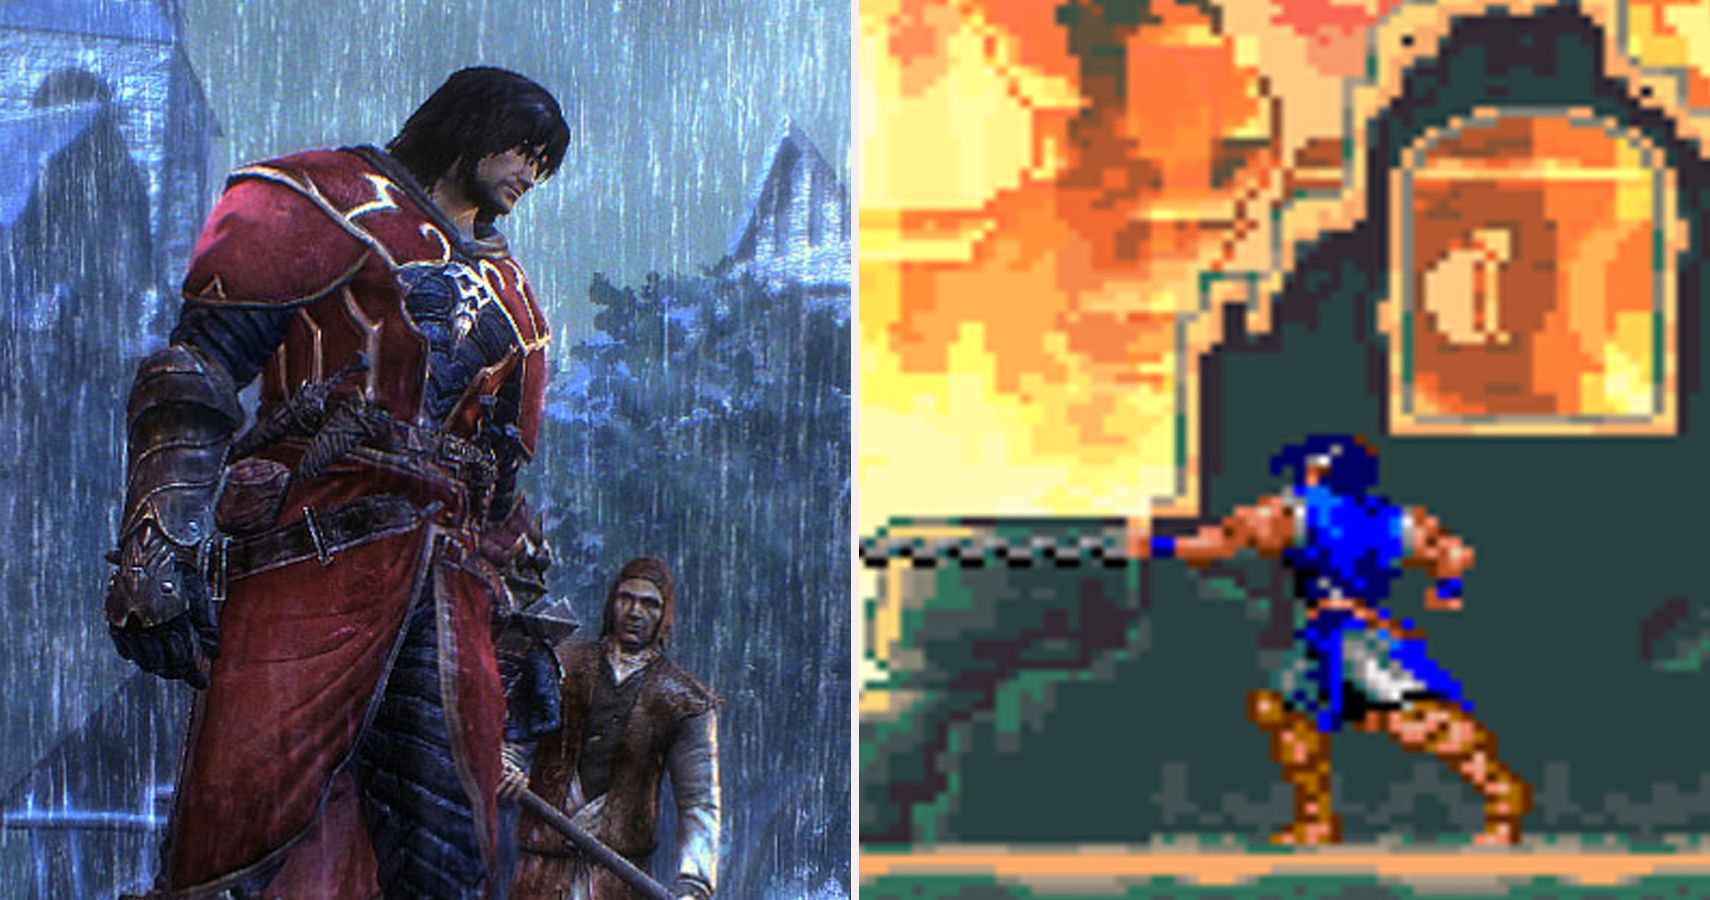 Castlevania: The 10 Worst Games In The Franchise (According To Metacritic)